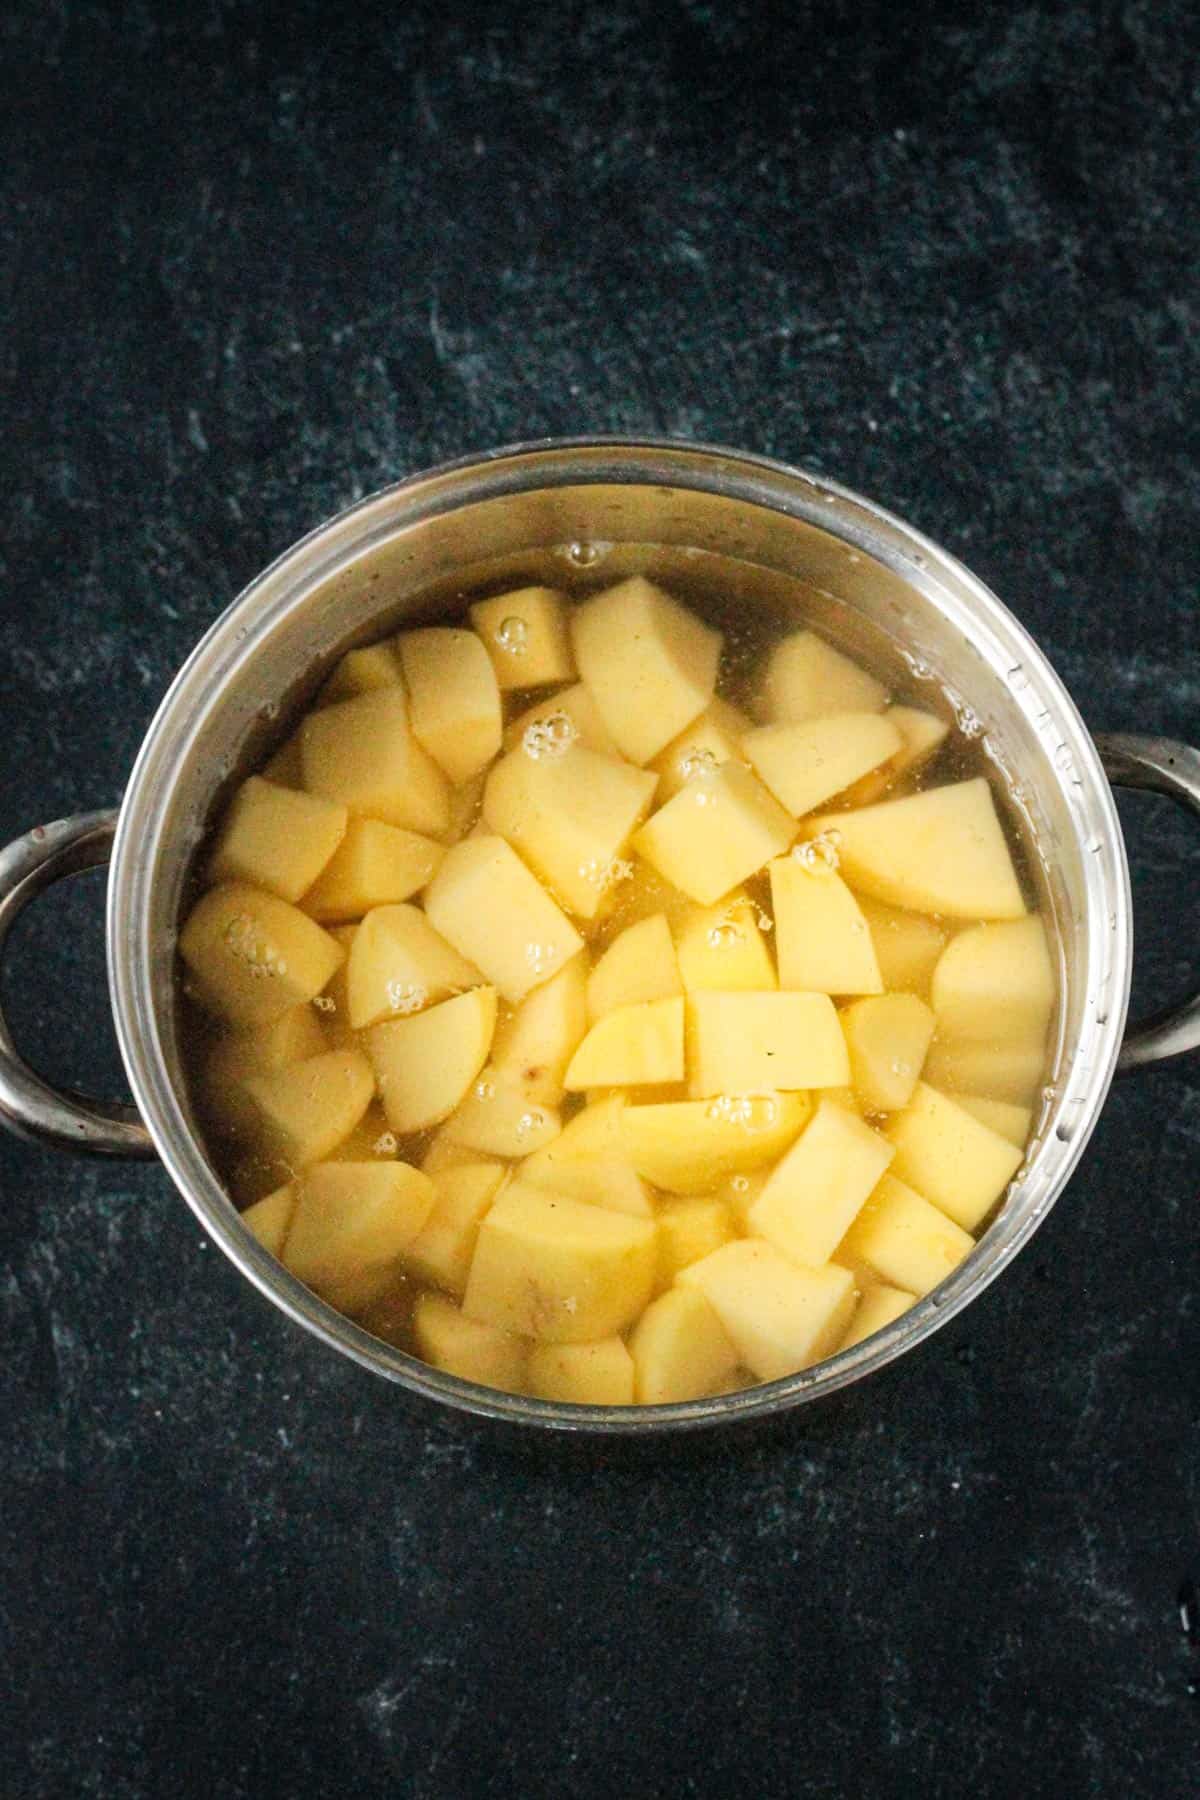 Diced potatoes in a pot of cold water.